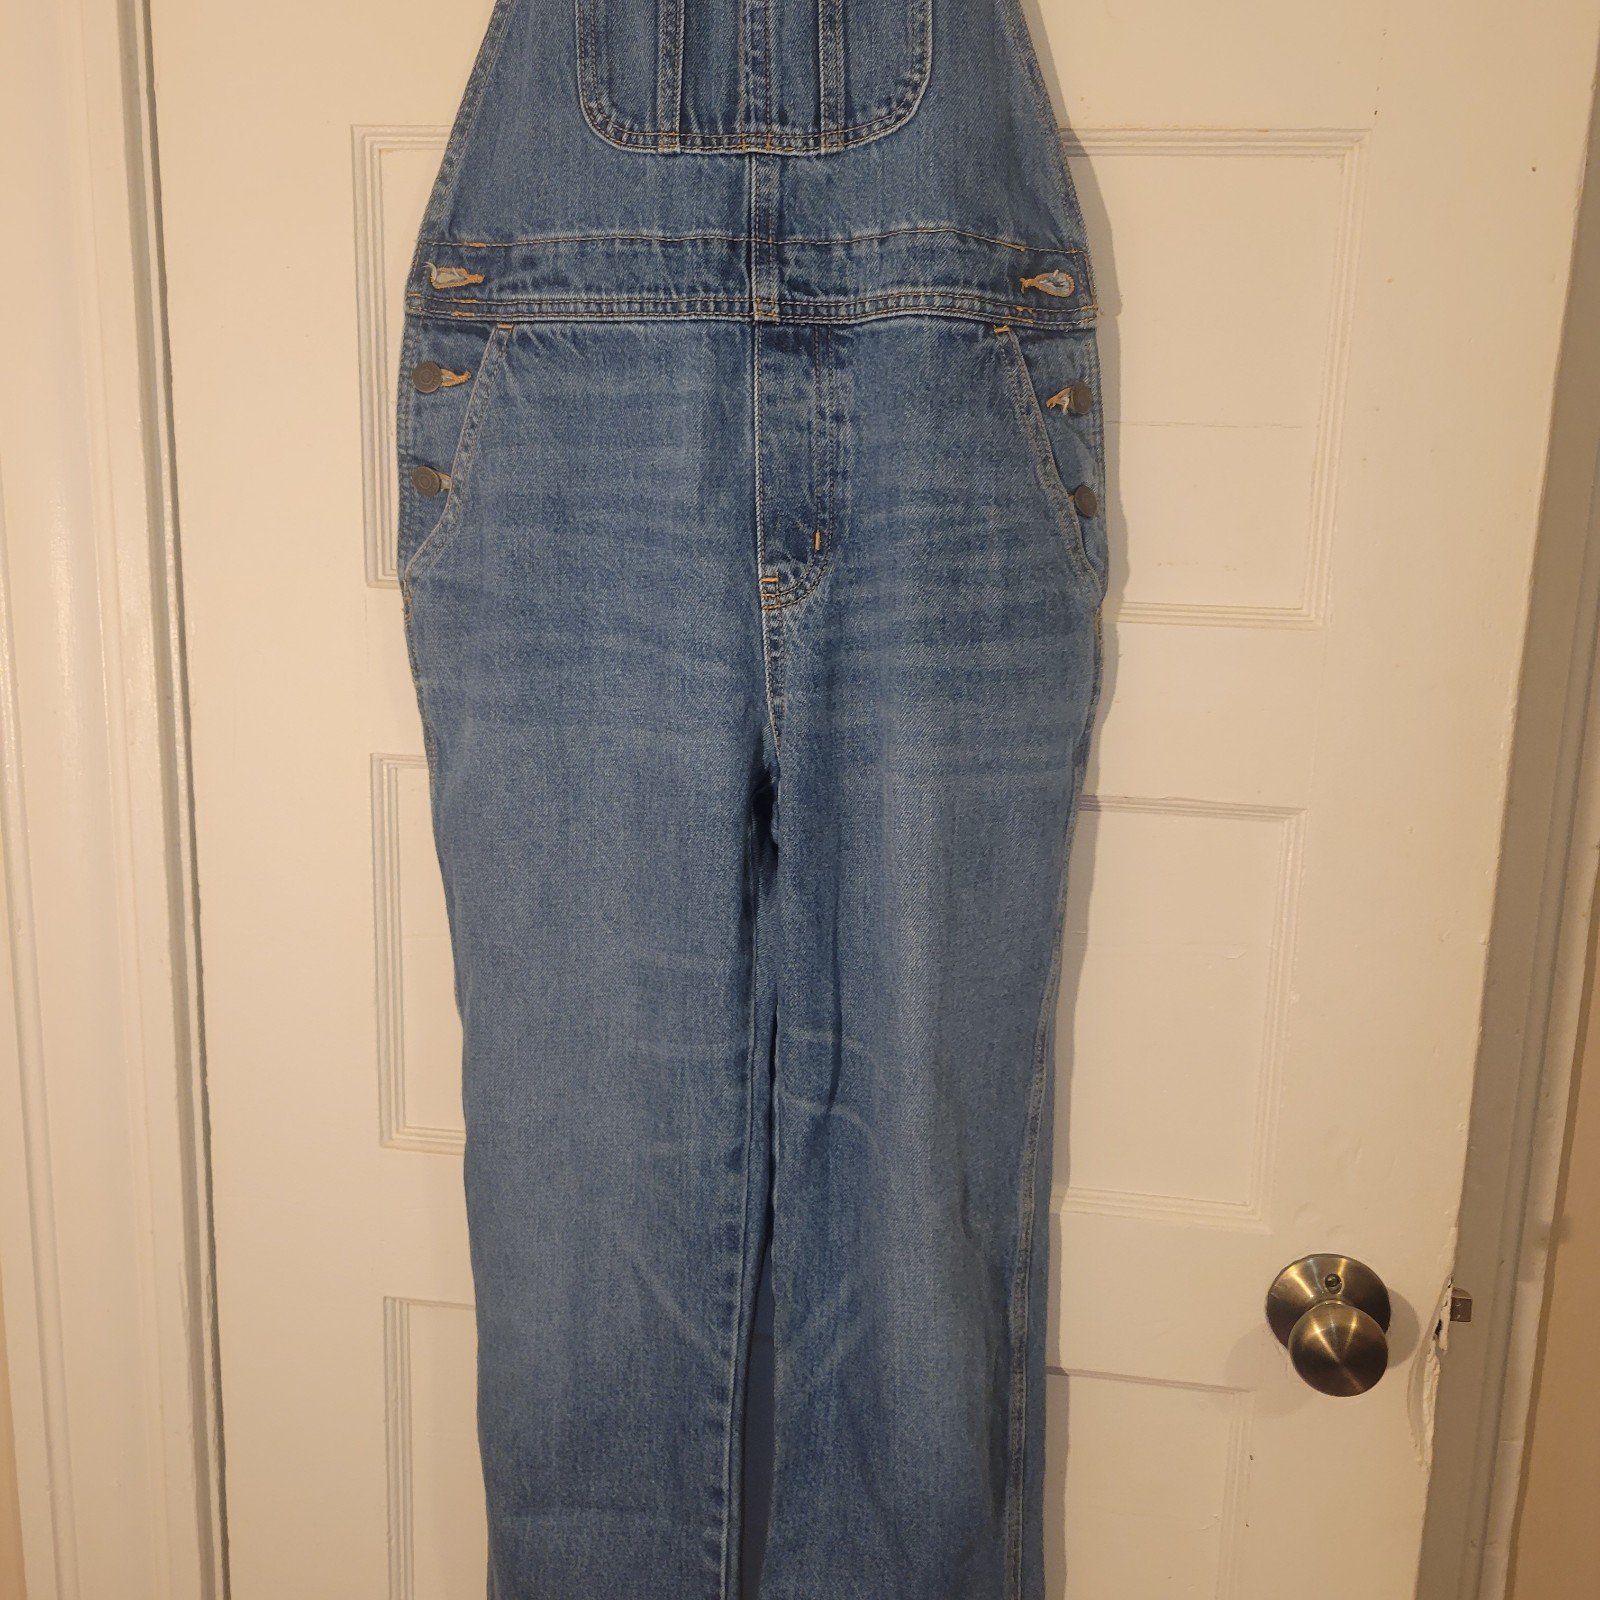 Promotions  Old Navy jean overalls GLlt2zdPm New Style